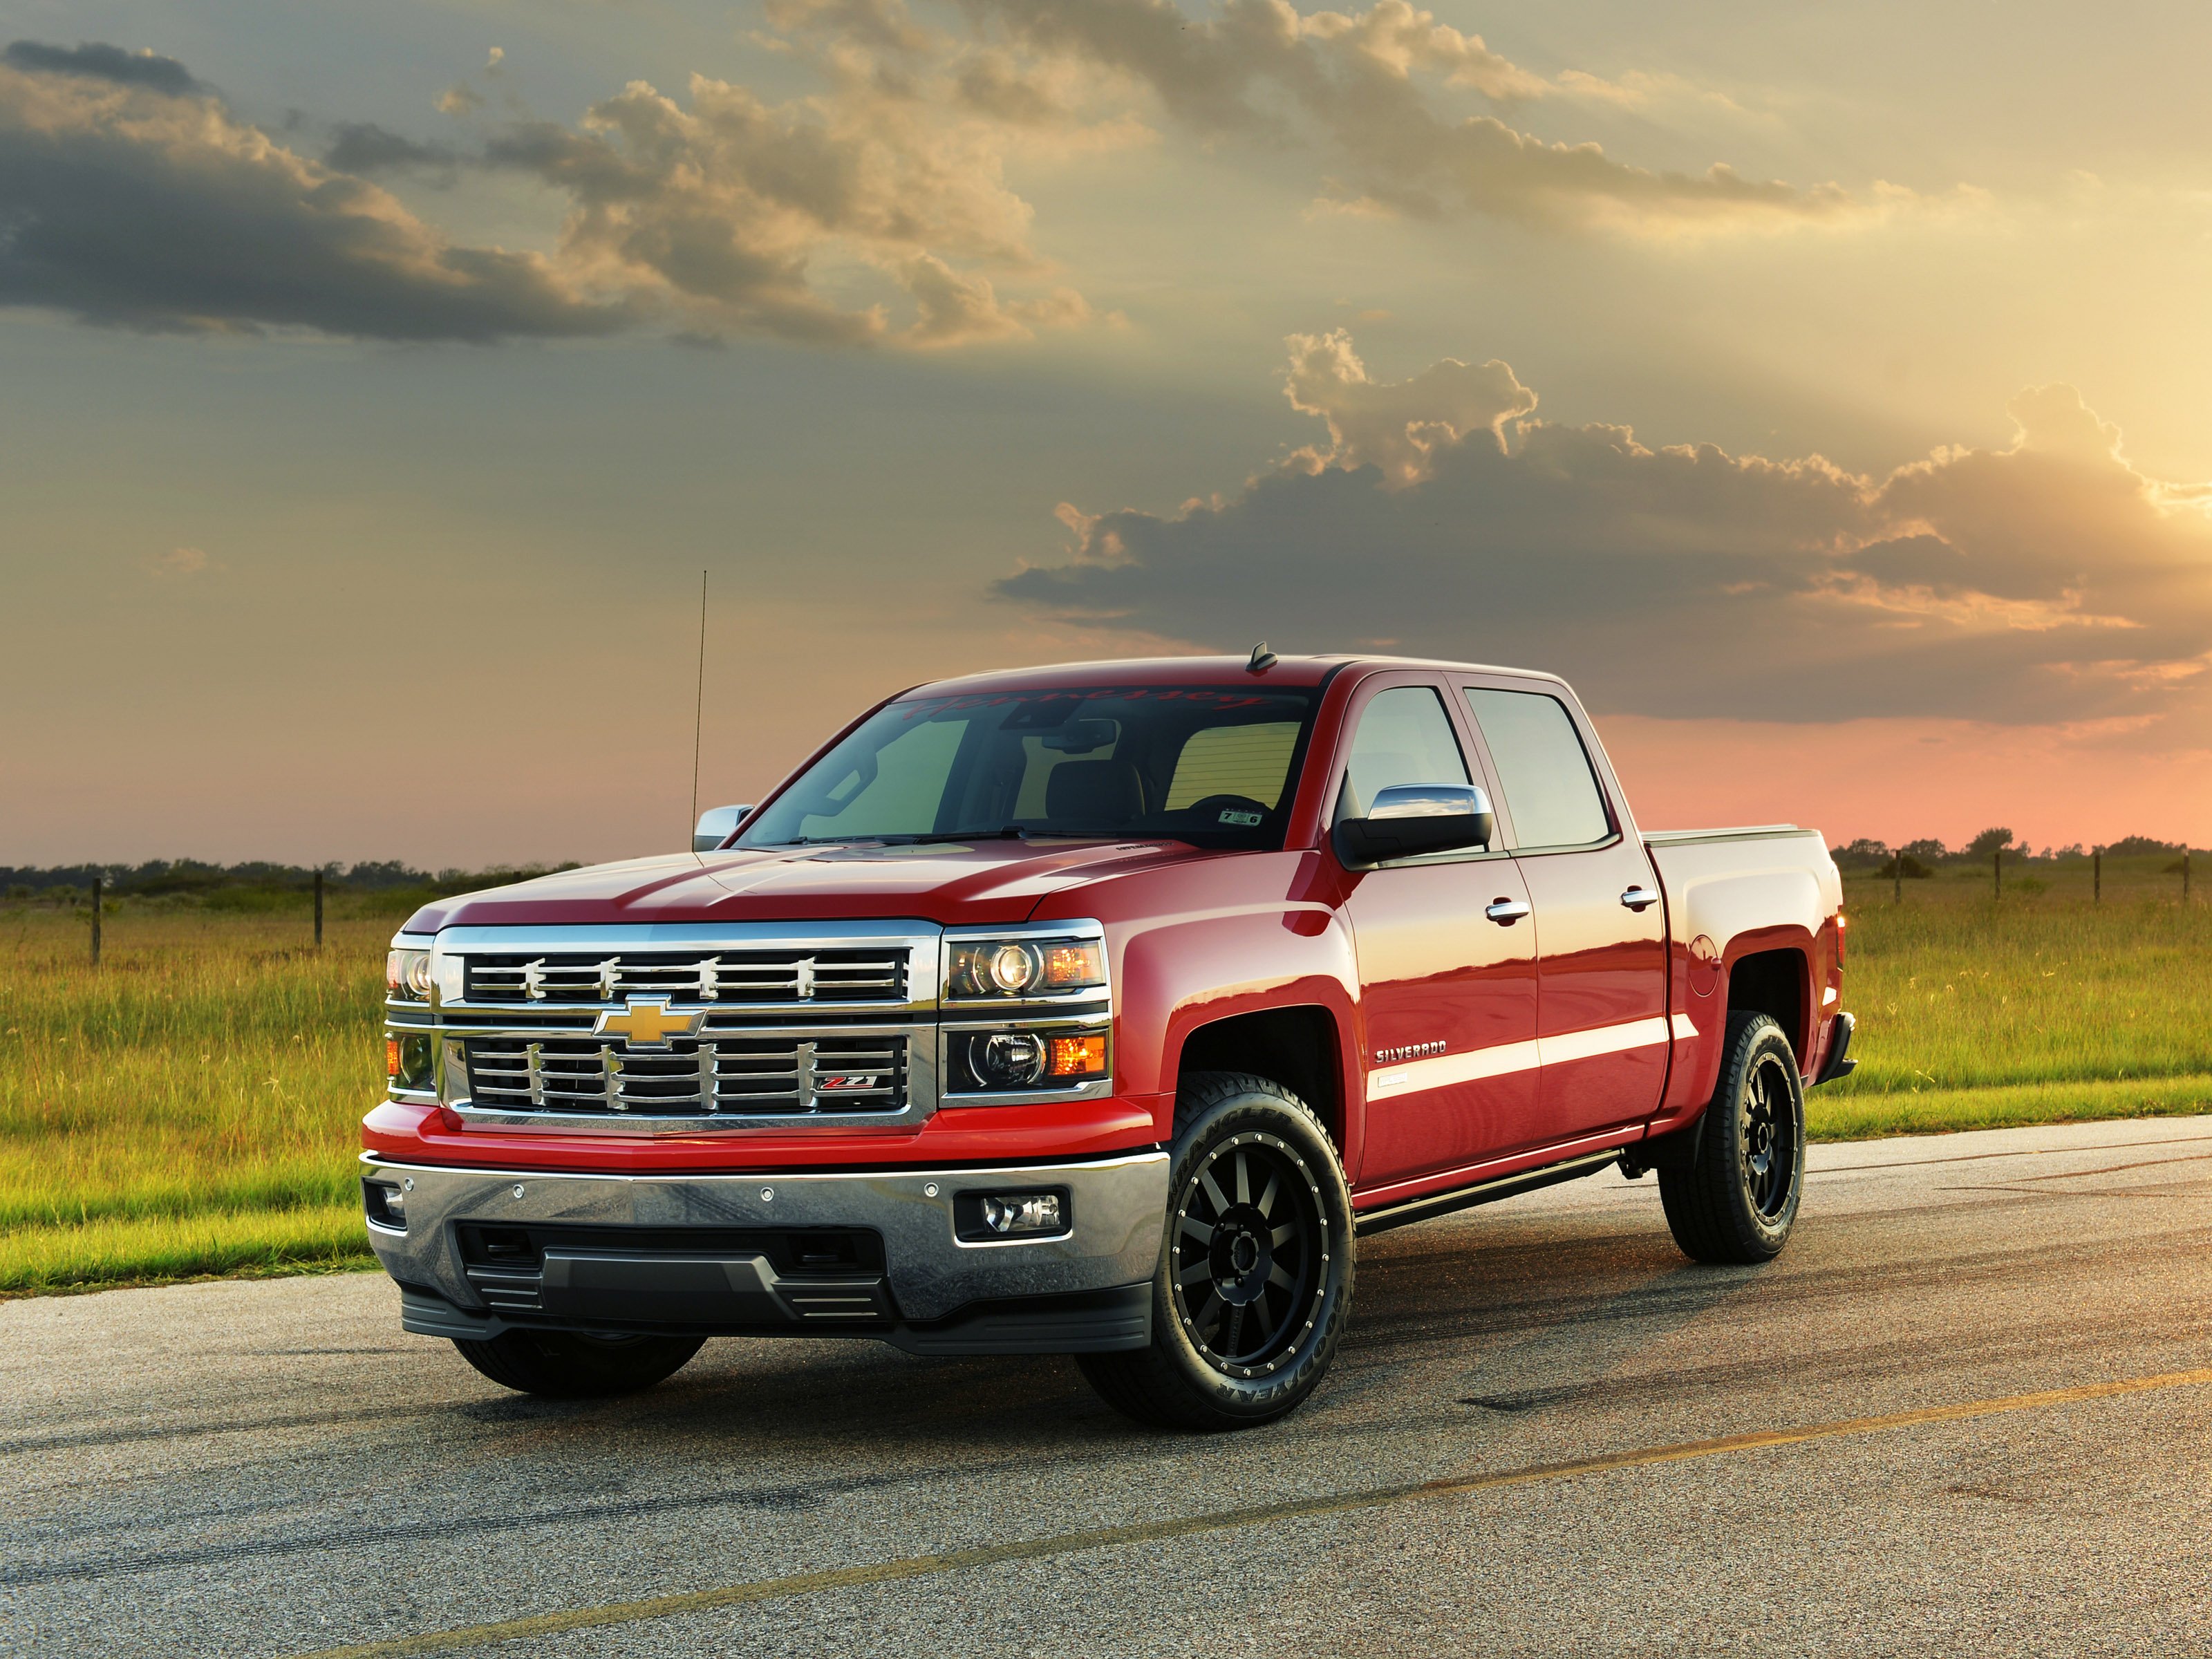 2014, Hennessey, Chevrolet, Silverado, Hpe550, Pick up, Supercharger Wallpaper